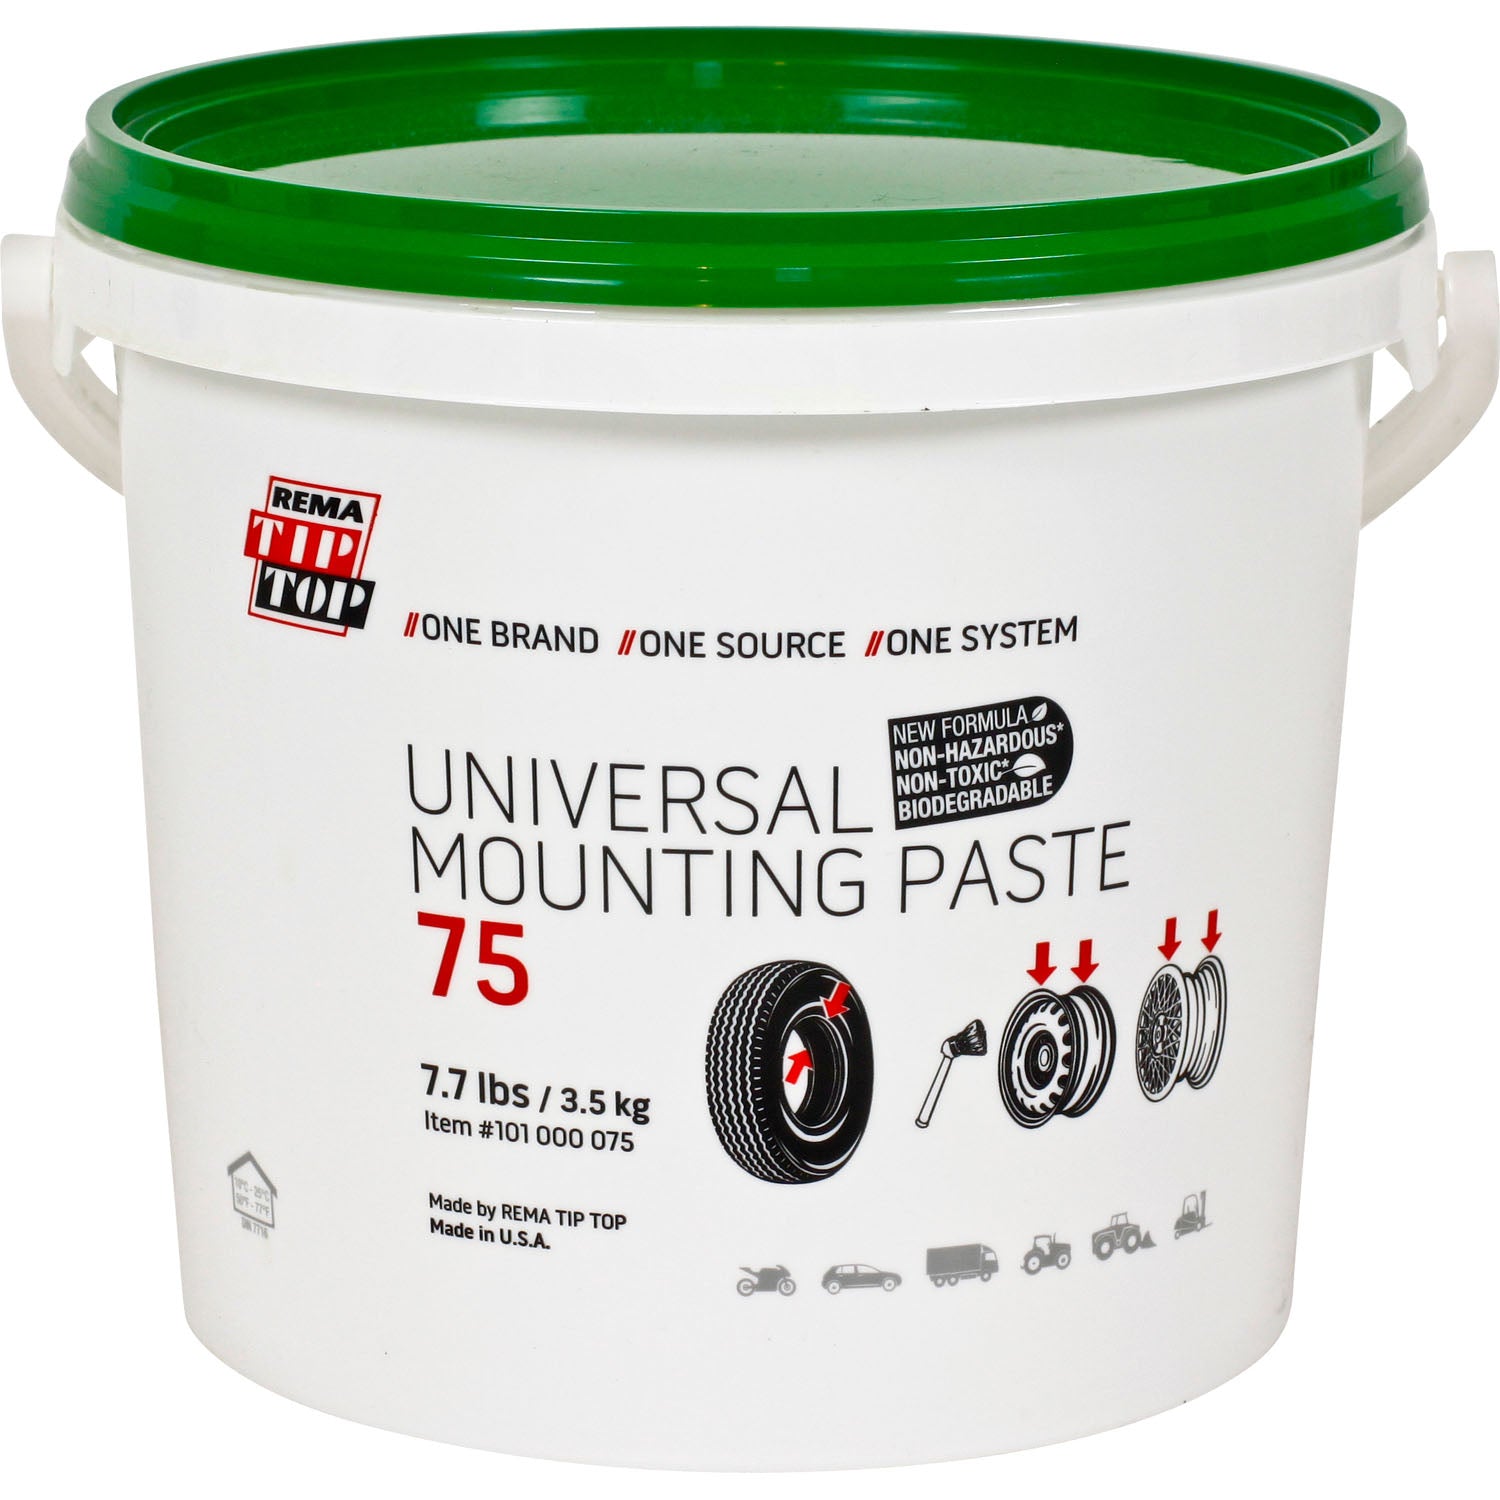 REMA TIP TOP 75 Universal Tire Mounting Paste 7.7 lb